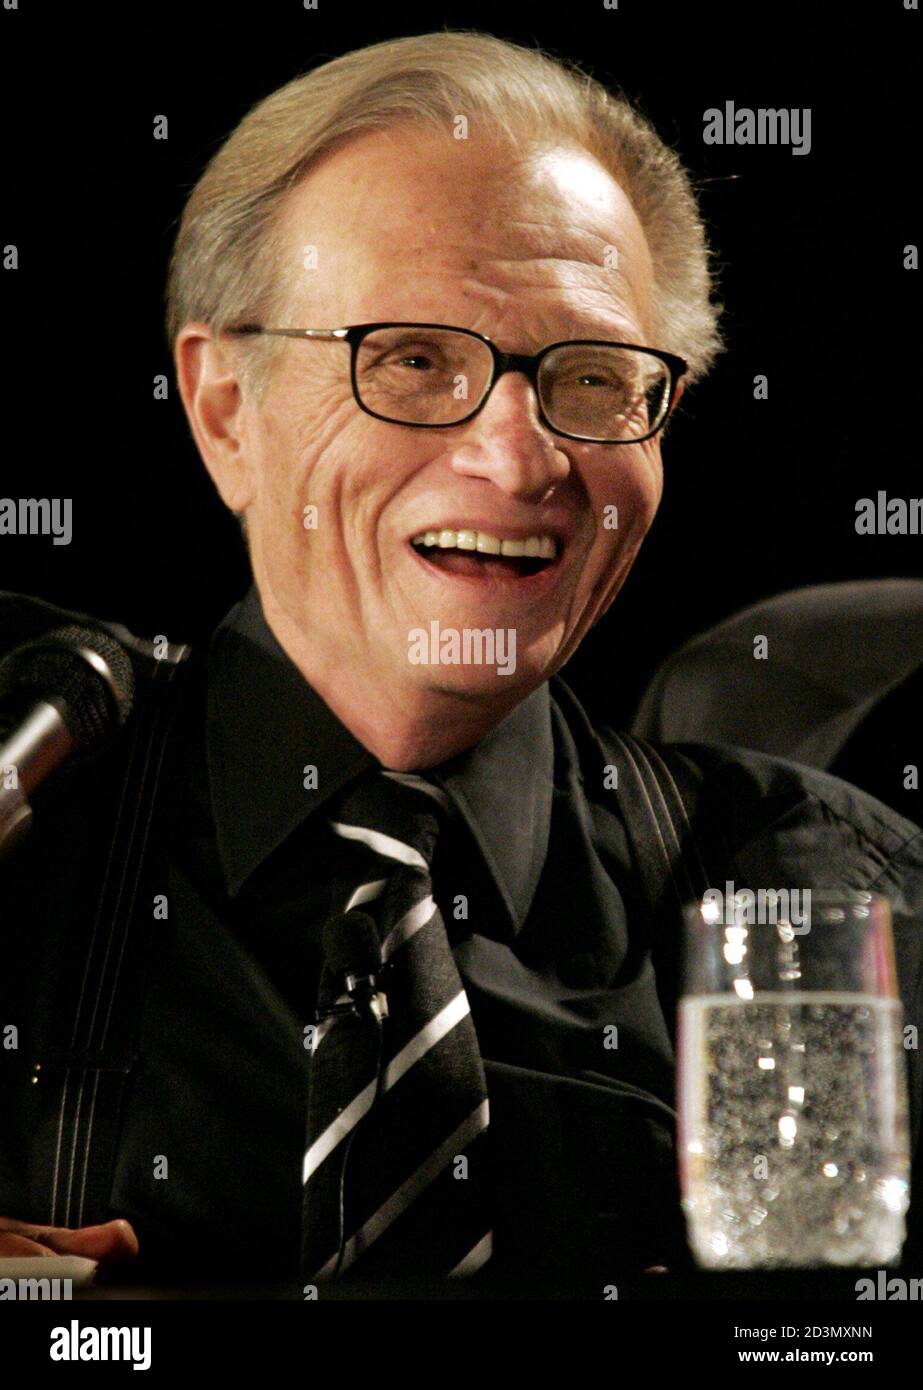 CNN talk-show host Larry King laughs as he moderates a roundtable discussion with gaming industry leaders during the Global Gaming Expo in Las Vegas, Nevada, October 6, 2004. Stock Photo